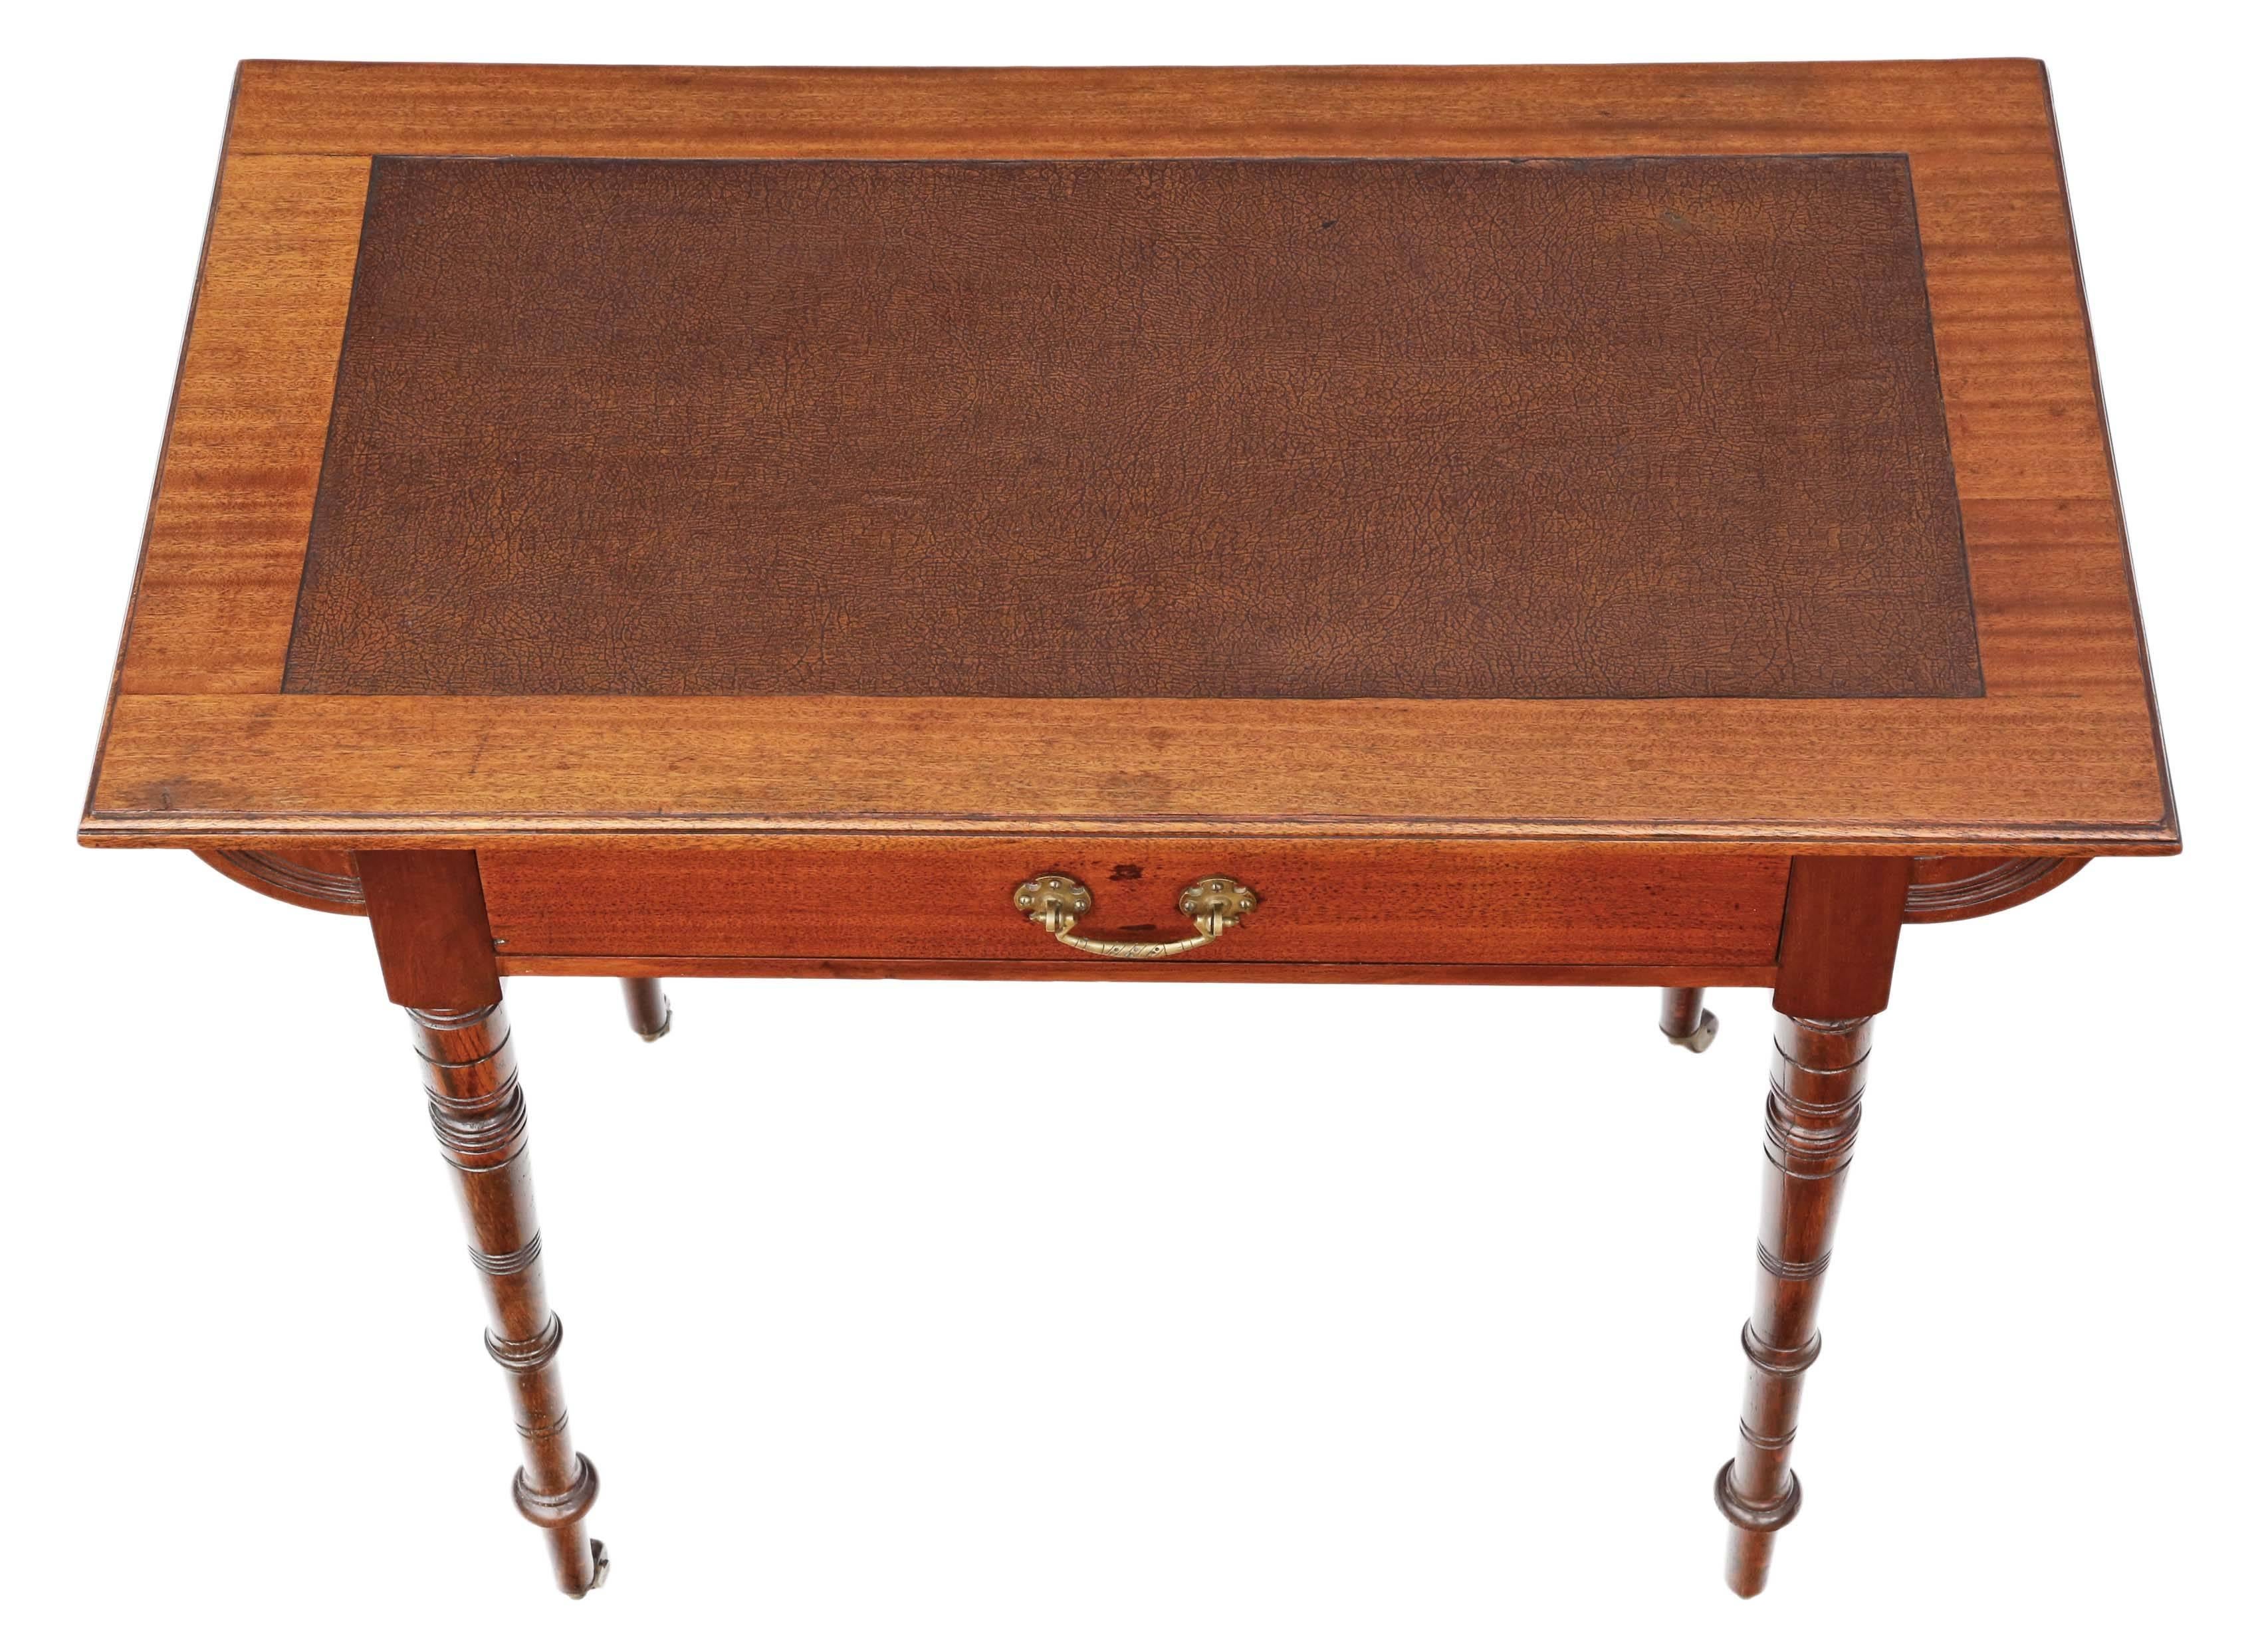 Antique late Victorian circa 1900 mahogany desk or writing table. Simple elegant style. 

No loose joints. Full of age, character and charm. The mahogany lined drawer slides freely. Period brass and ceramic castors. Patinated old rexine writing